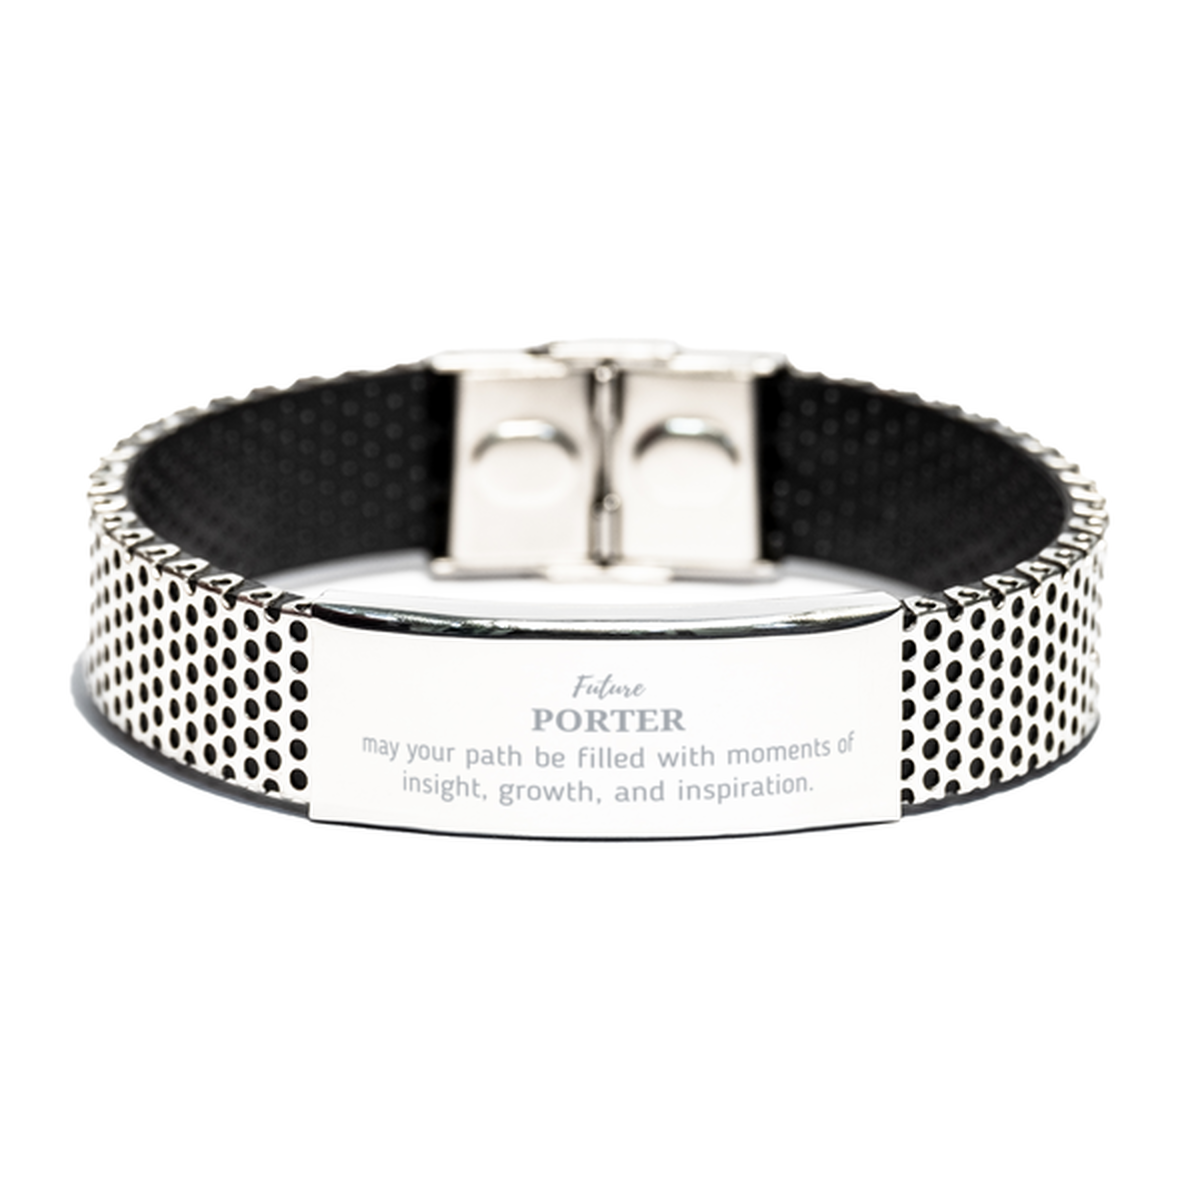 Future Porter Gifts, May your path be filled with moments of insight, Graduation Gifts for New Porter, Christmas Unique Stainless Steel Bracelet For Men, Women, Friends